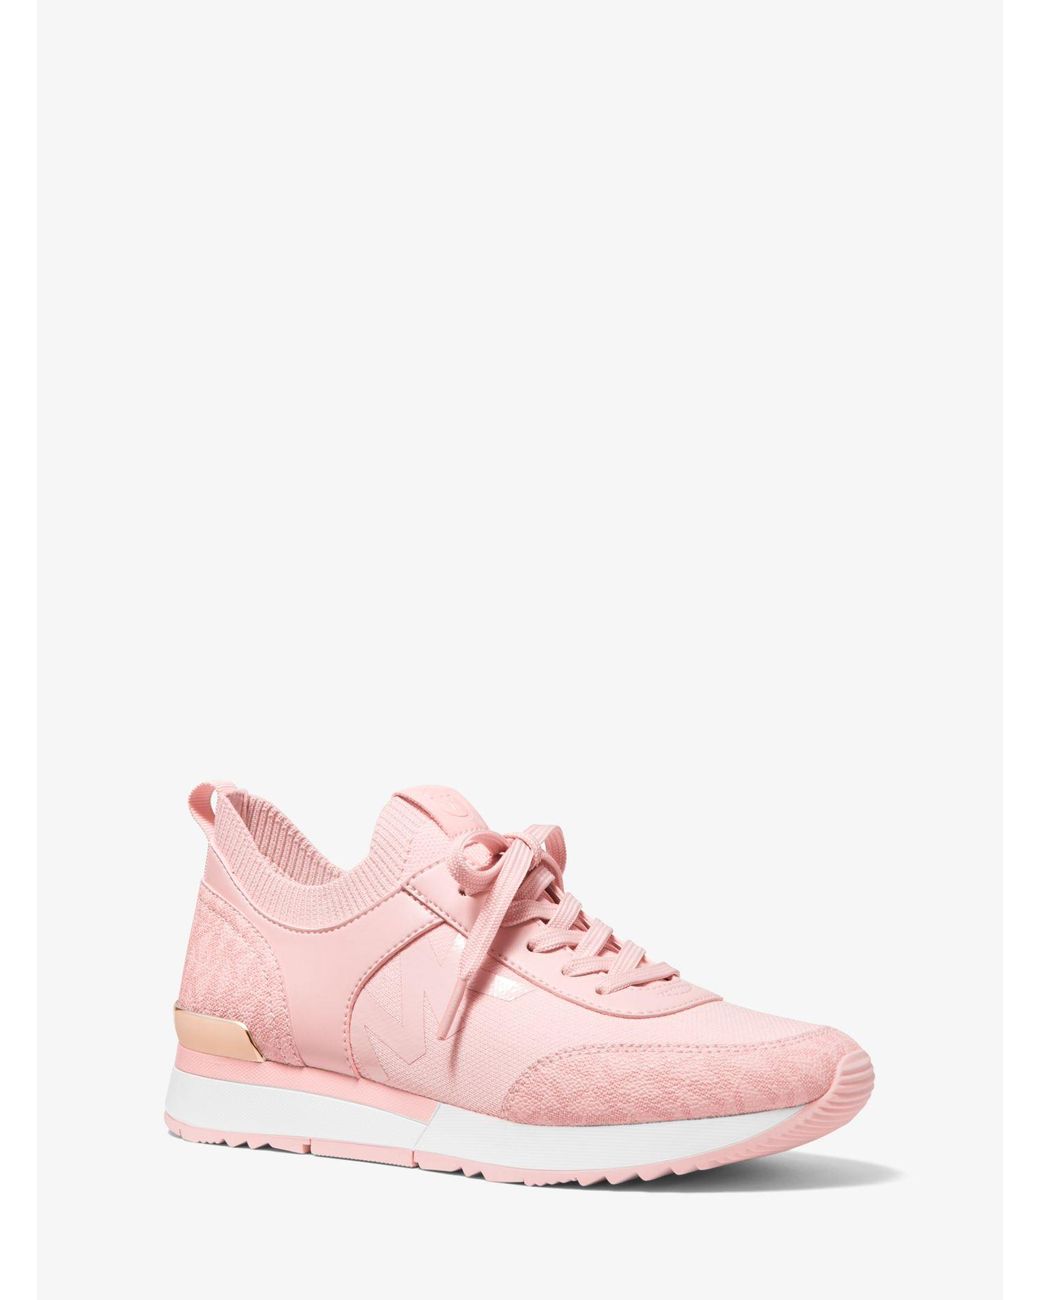 Michael Kors Jenkins Mixed-media Trainer in Pink | Lyst